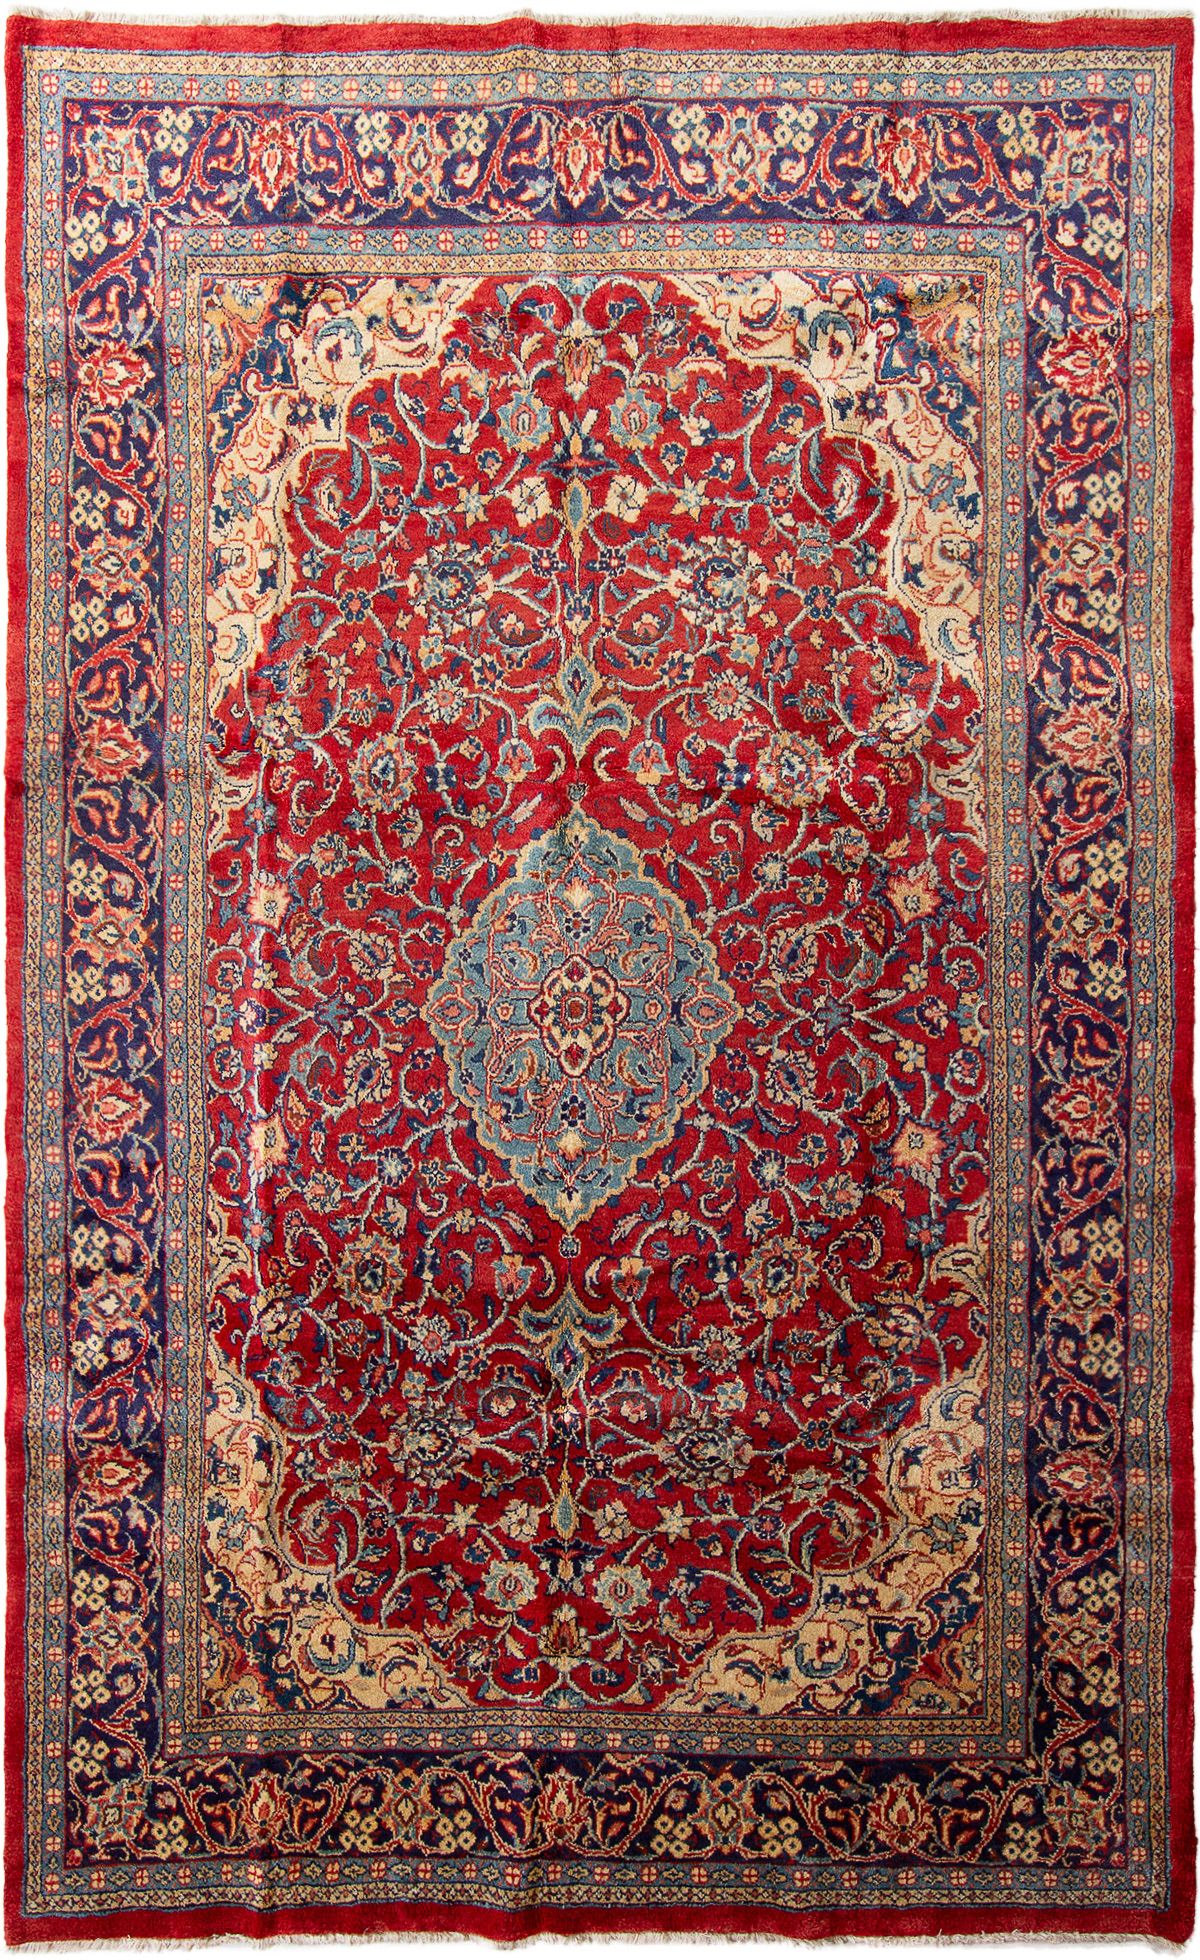 Hand-knotted Mahal  Wool Rug 6'11" x 11'5" Size: 6'11" x 11'5"  